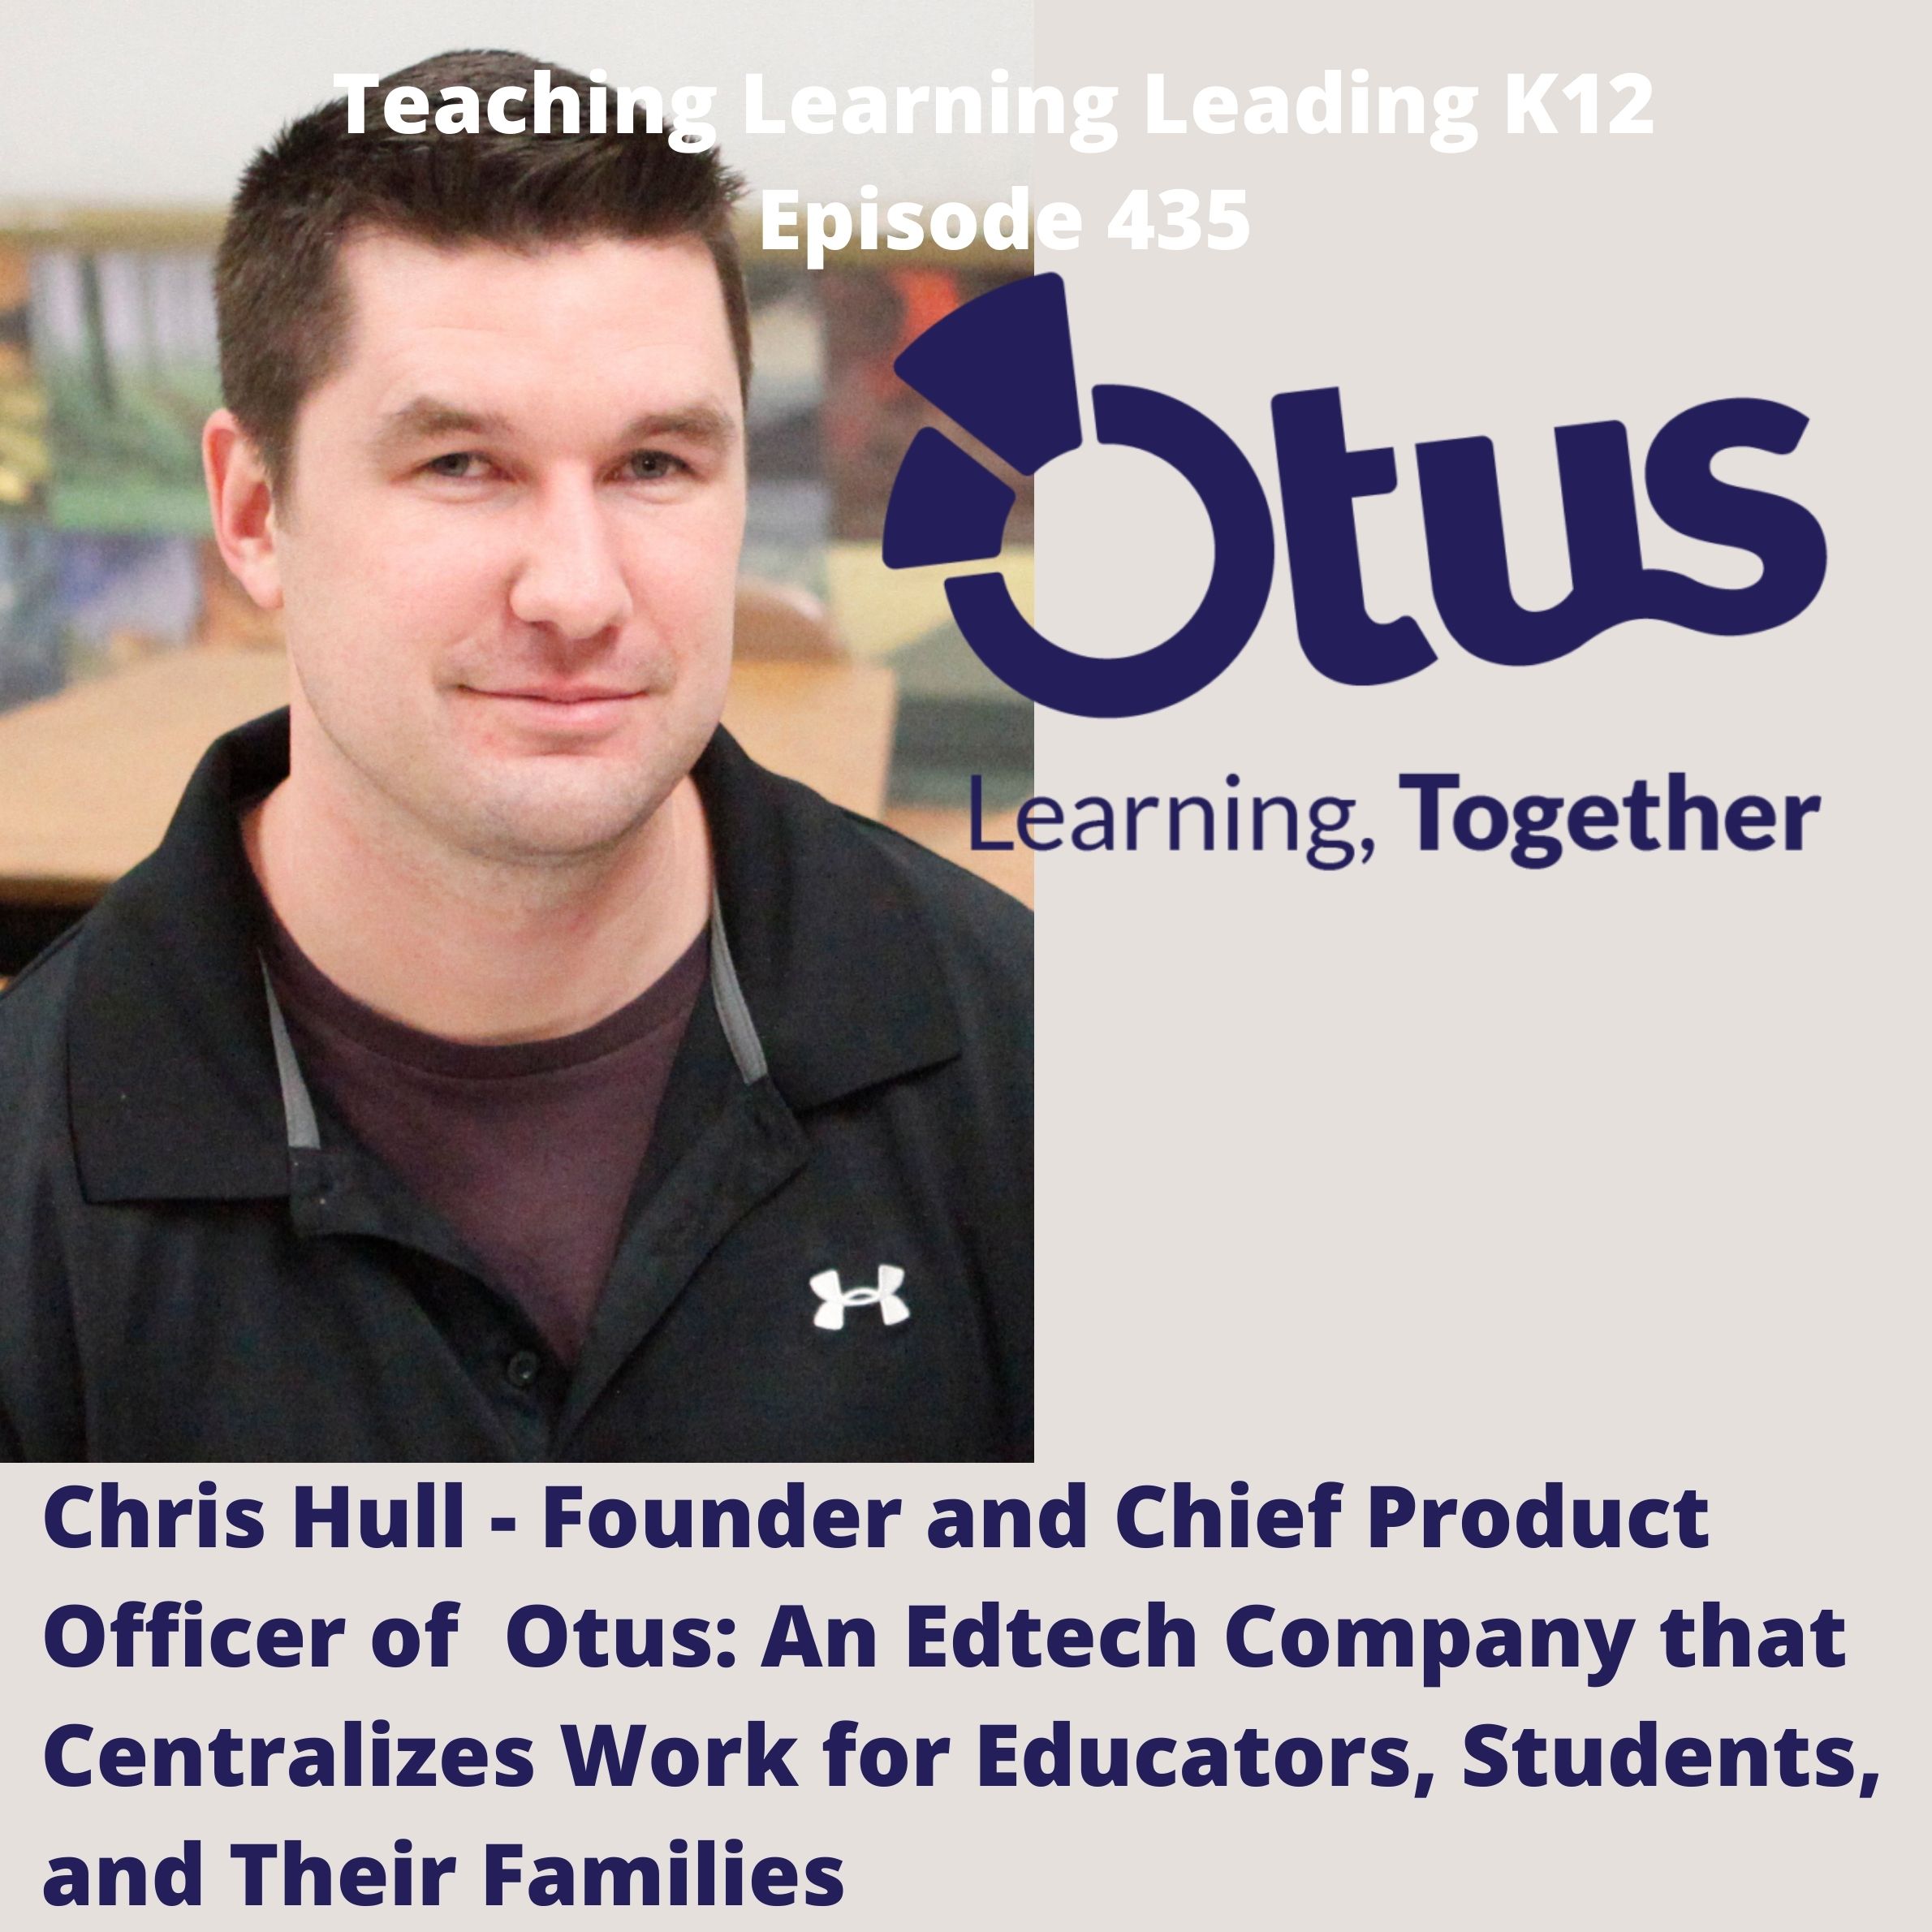 Chris Hull - Founder and Chief Product Officer of Otus: An Edtech Company that Centralizes Work for Educators, Students, and Their Families - 435 Image